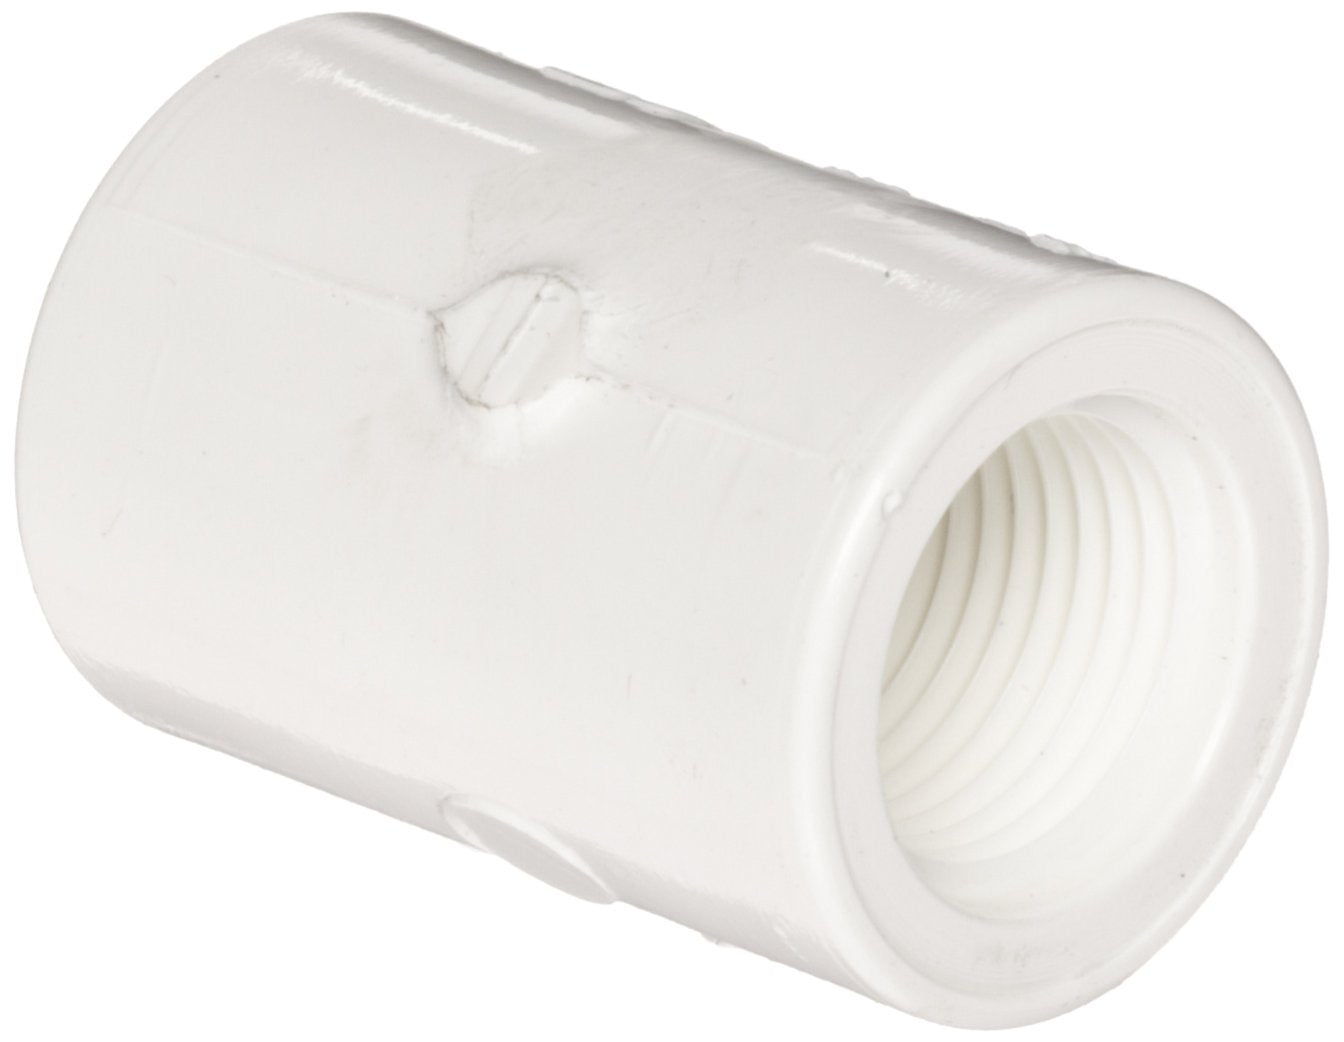 435-010 - 1"  PVC Pipe Fitting, Adapter, Schedule 40, White ,Socket x NPT Female